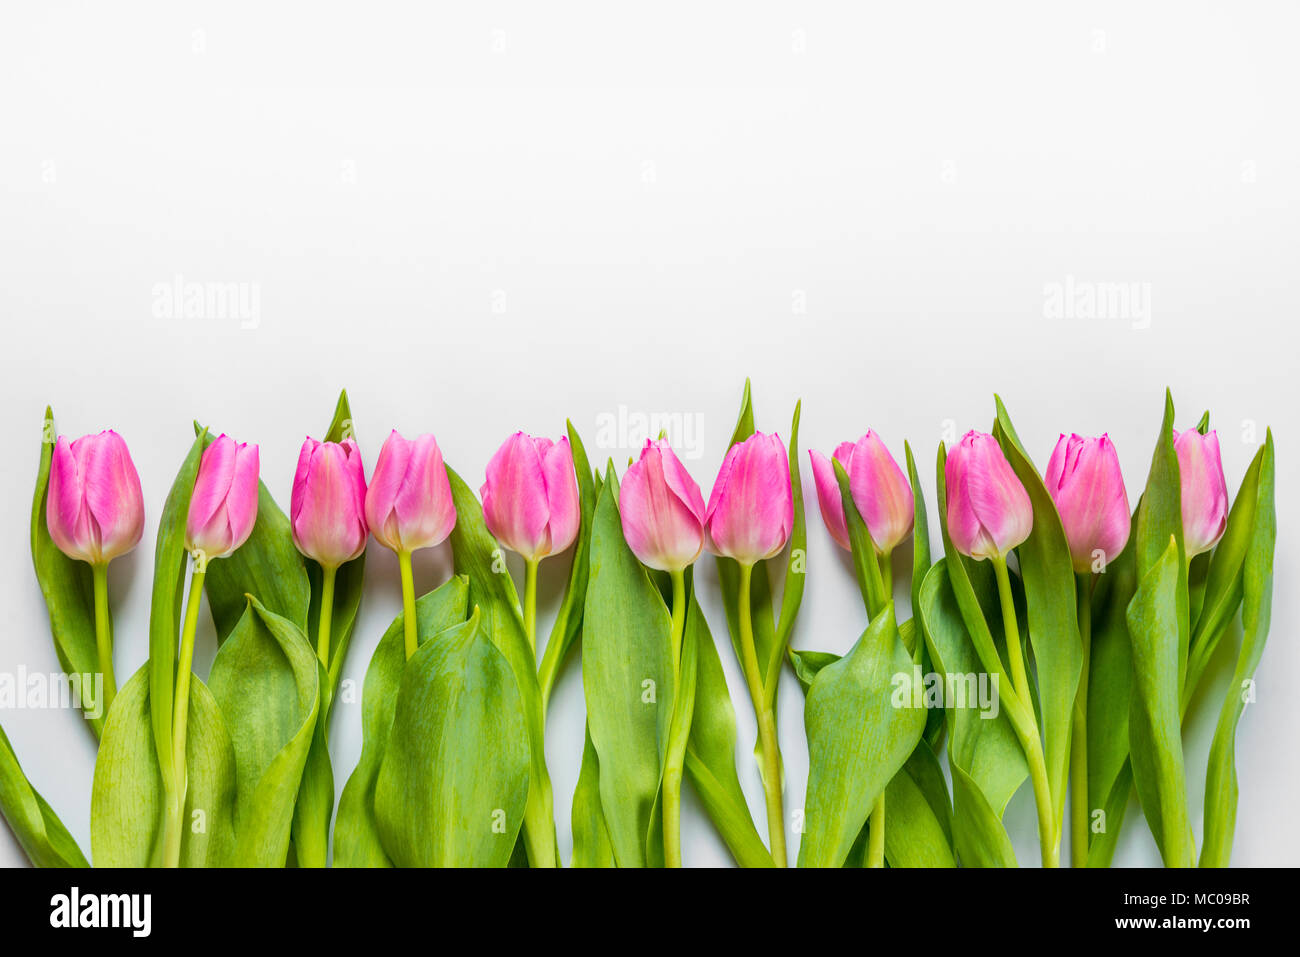 Top view of pink tulips arranged in line over white background. Copy space. Stock Photo